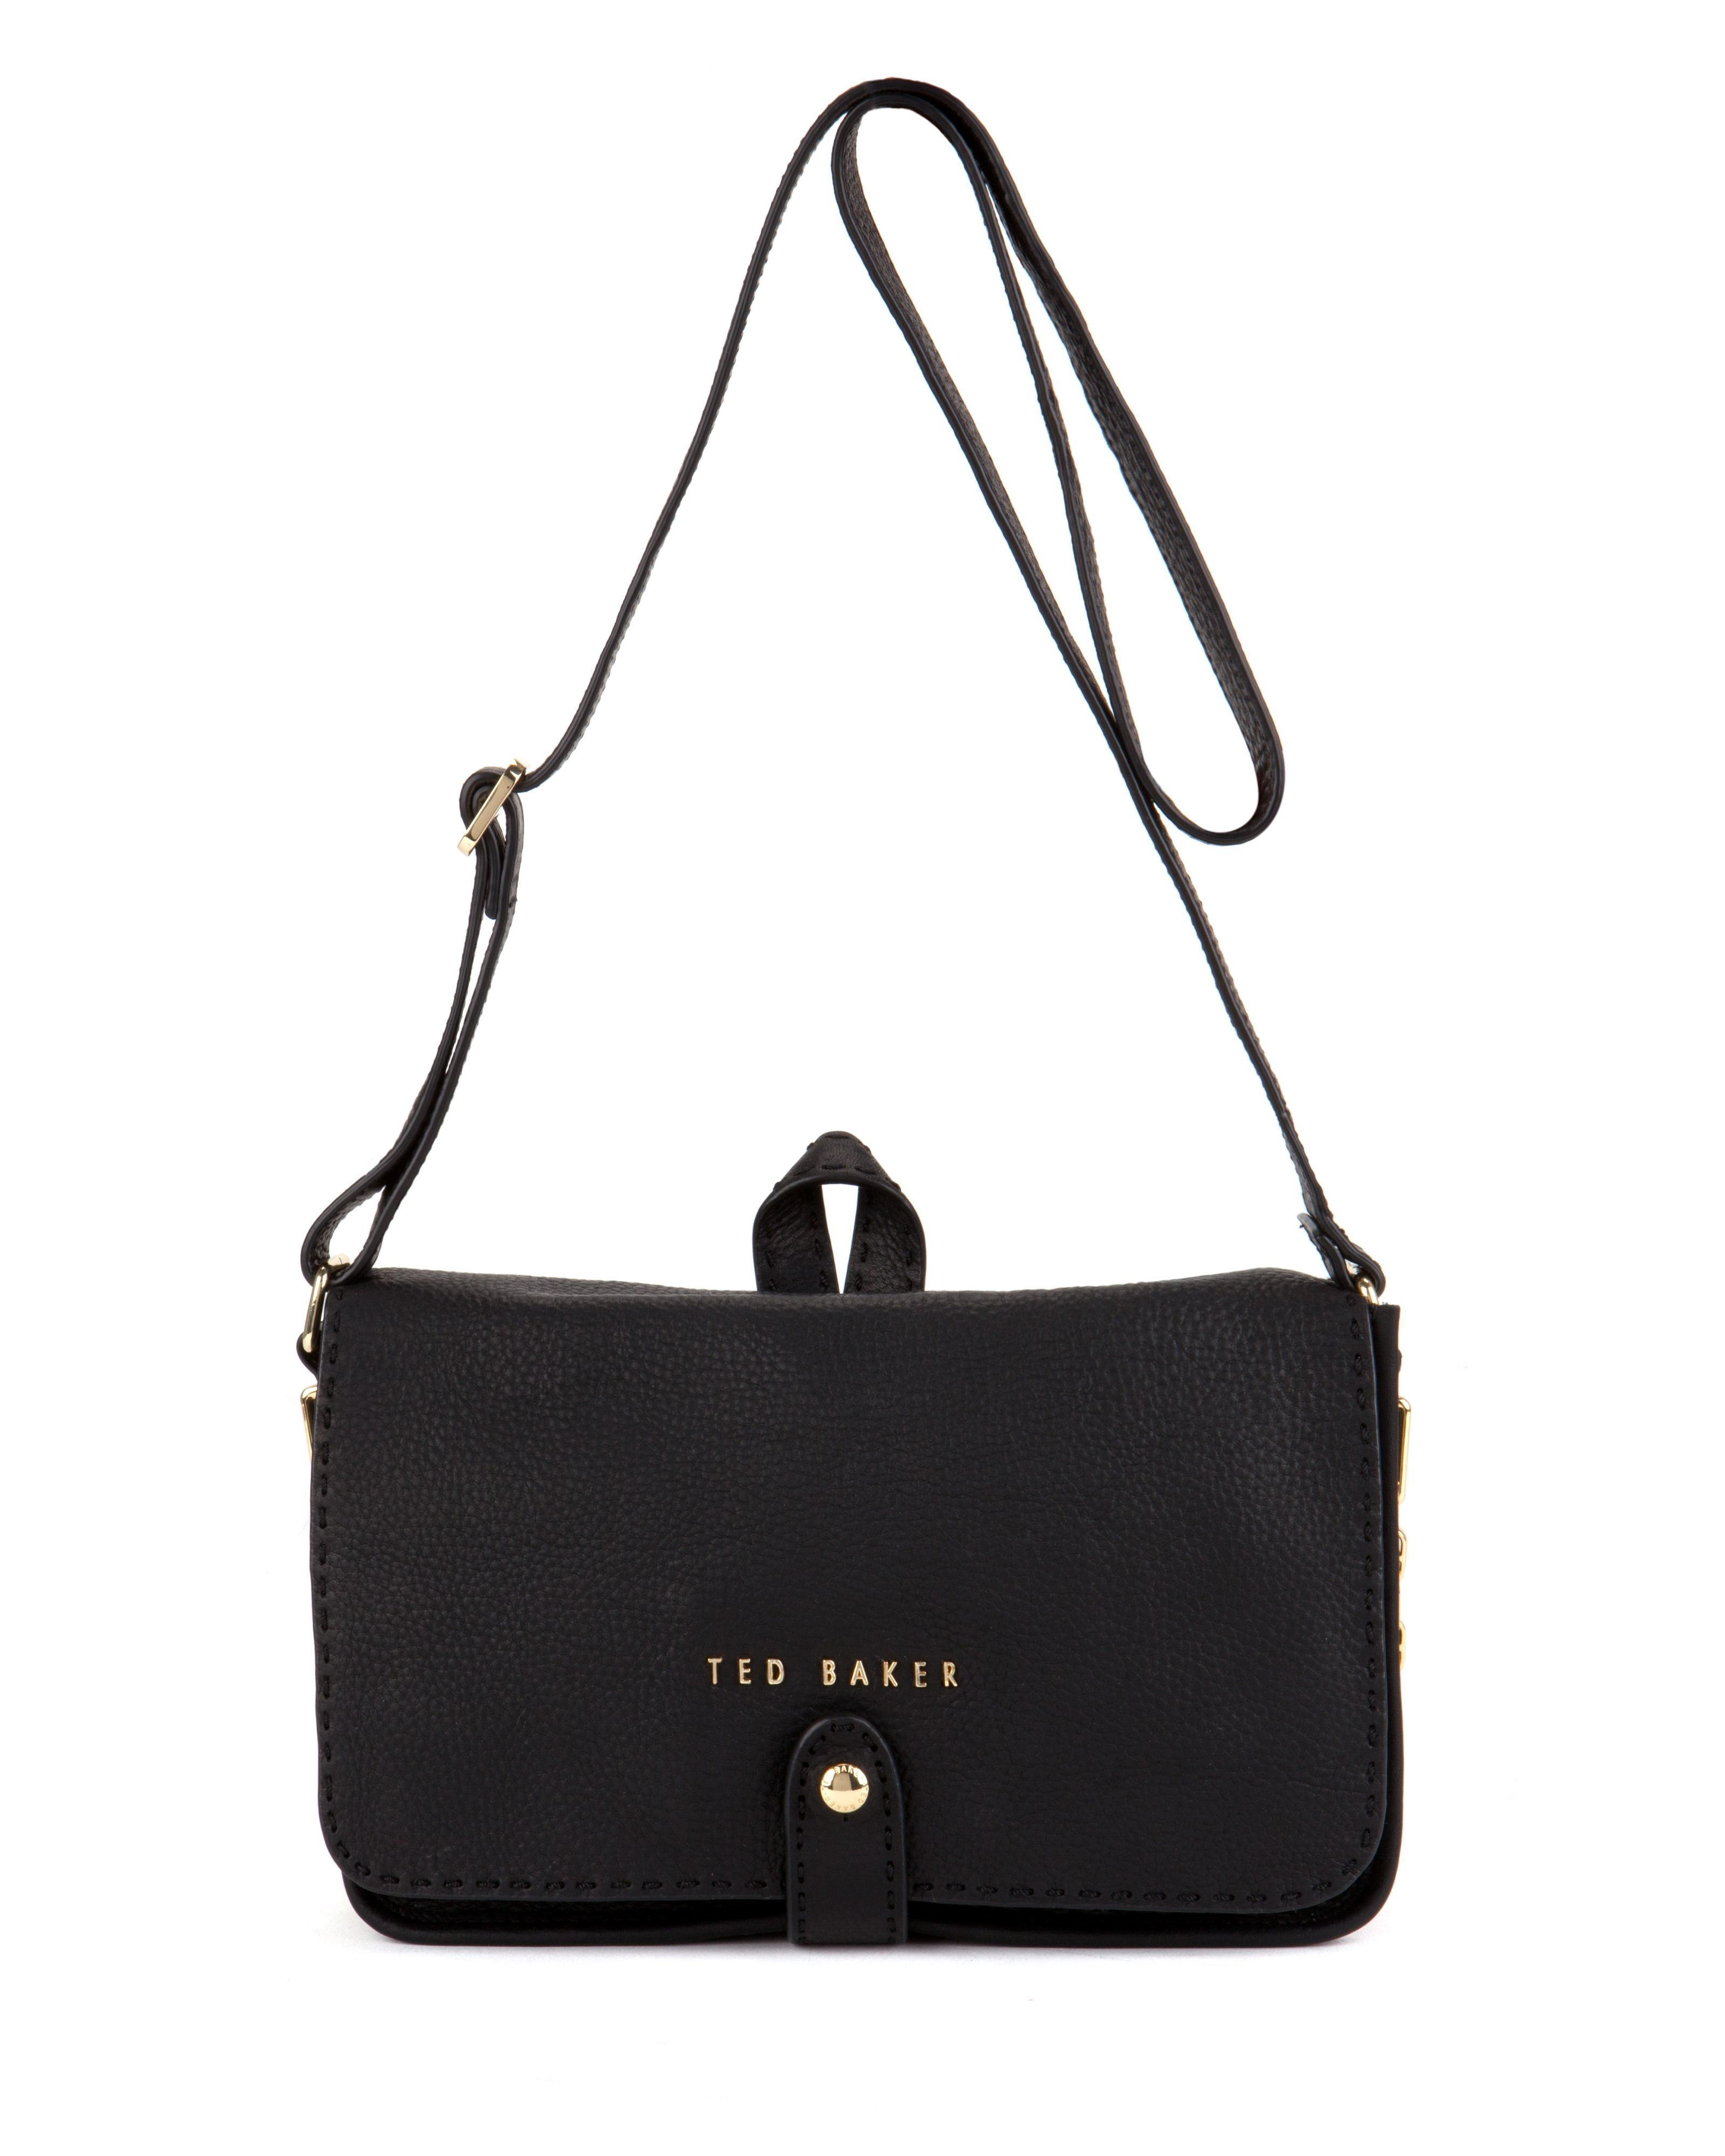 Ted baker Chanun Chain Trim Leather Cross Body Bag in Black | Lyst